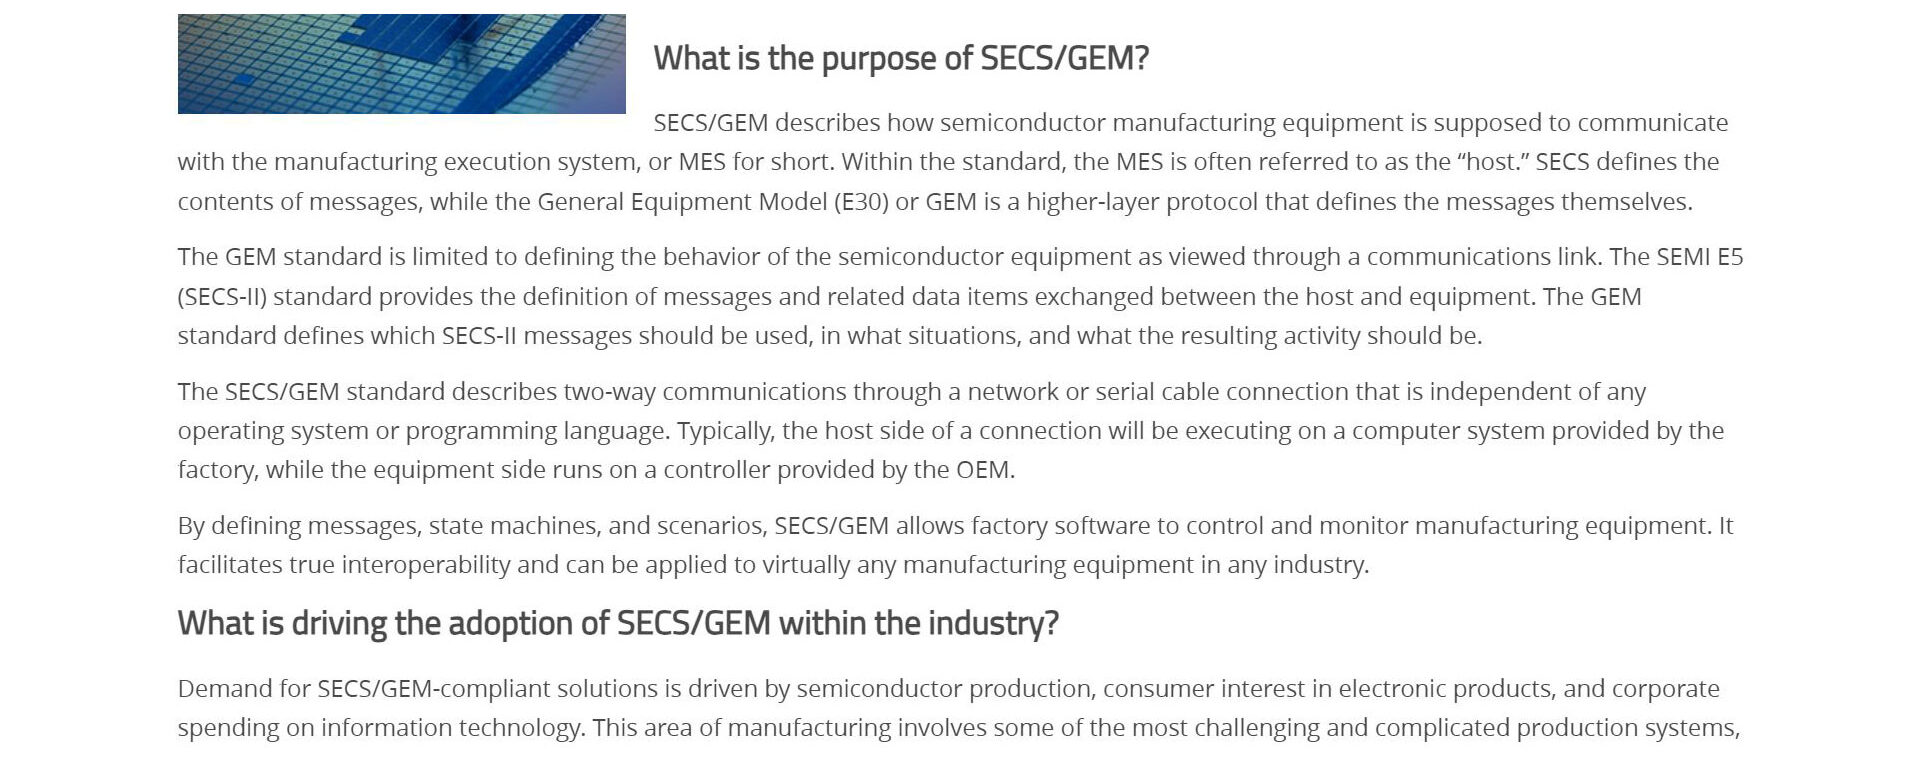 Recommended Reading: What is SECS/GEM